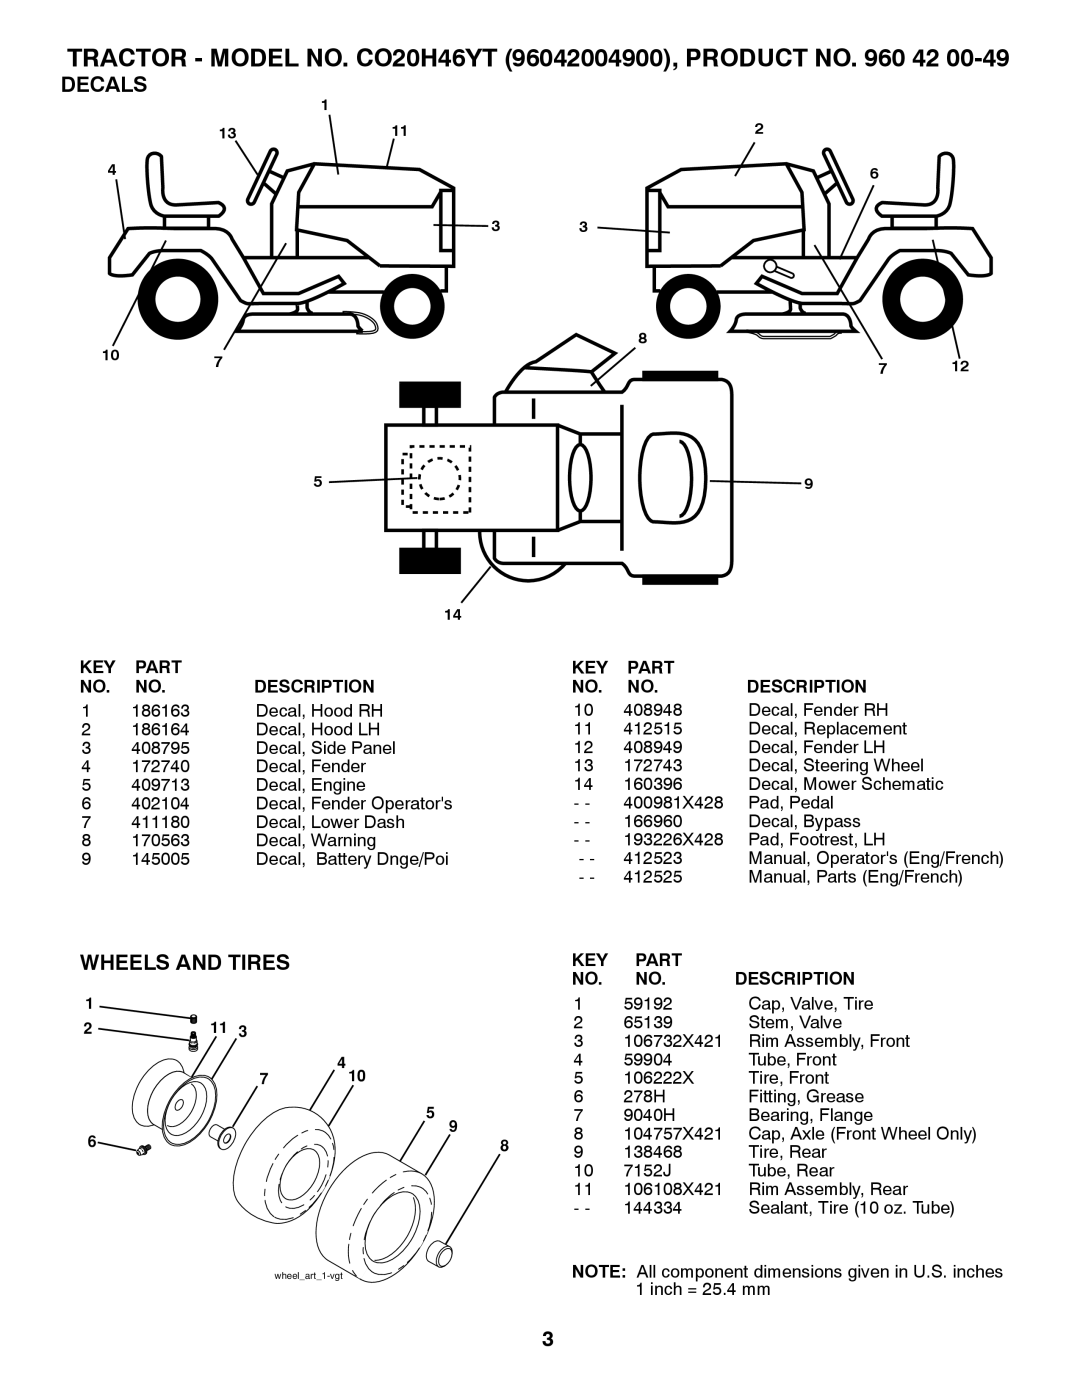 Poulan 412525 Decals, Wheels And Tires, TRACTOR - MODEL NO. CO20H46YT 96042004900, PRODUCT NO. 960 42, Part, Description 